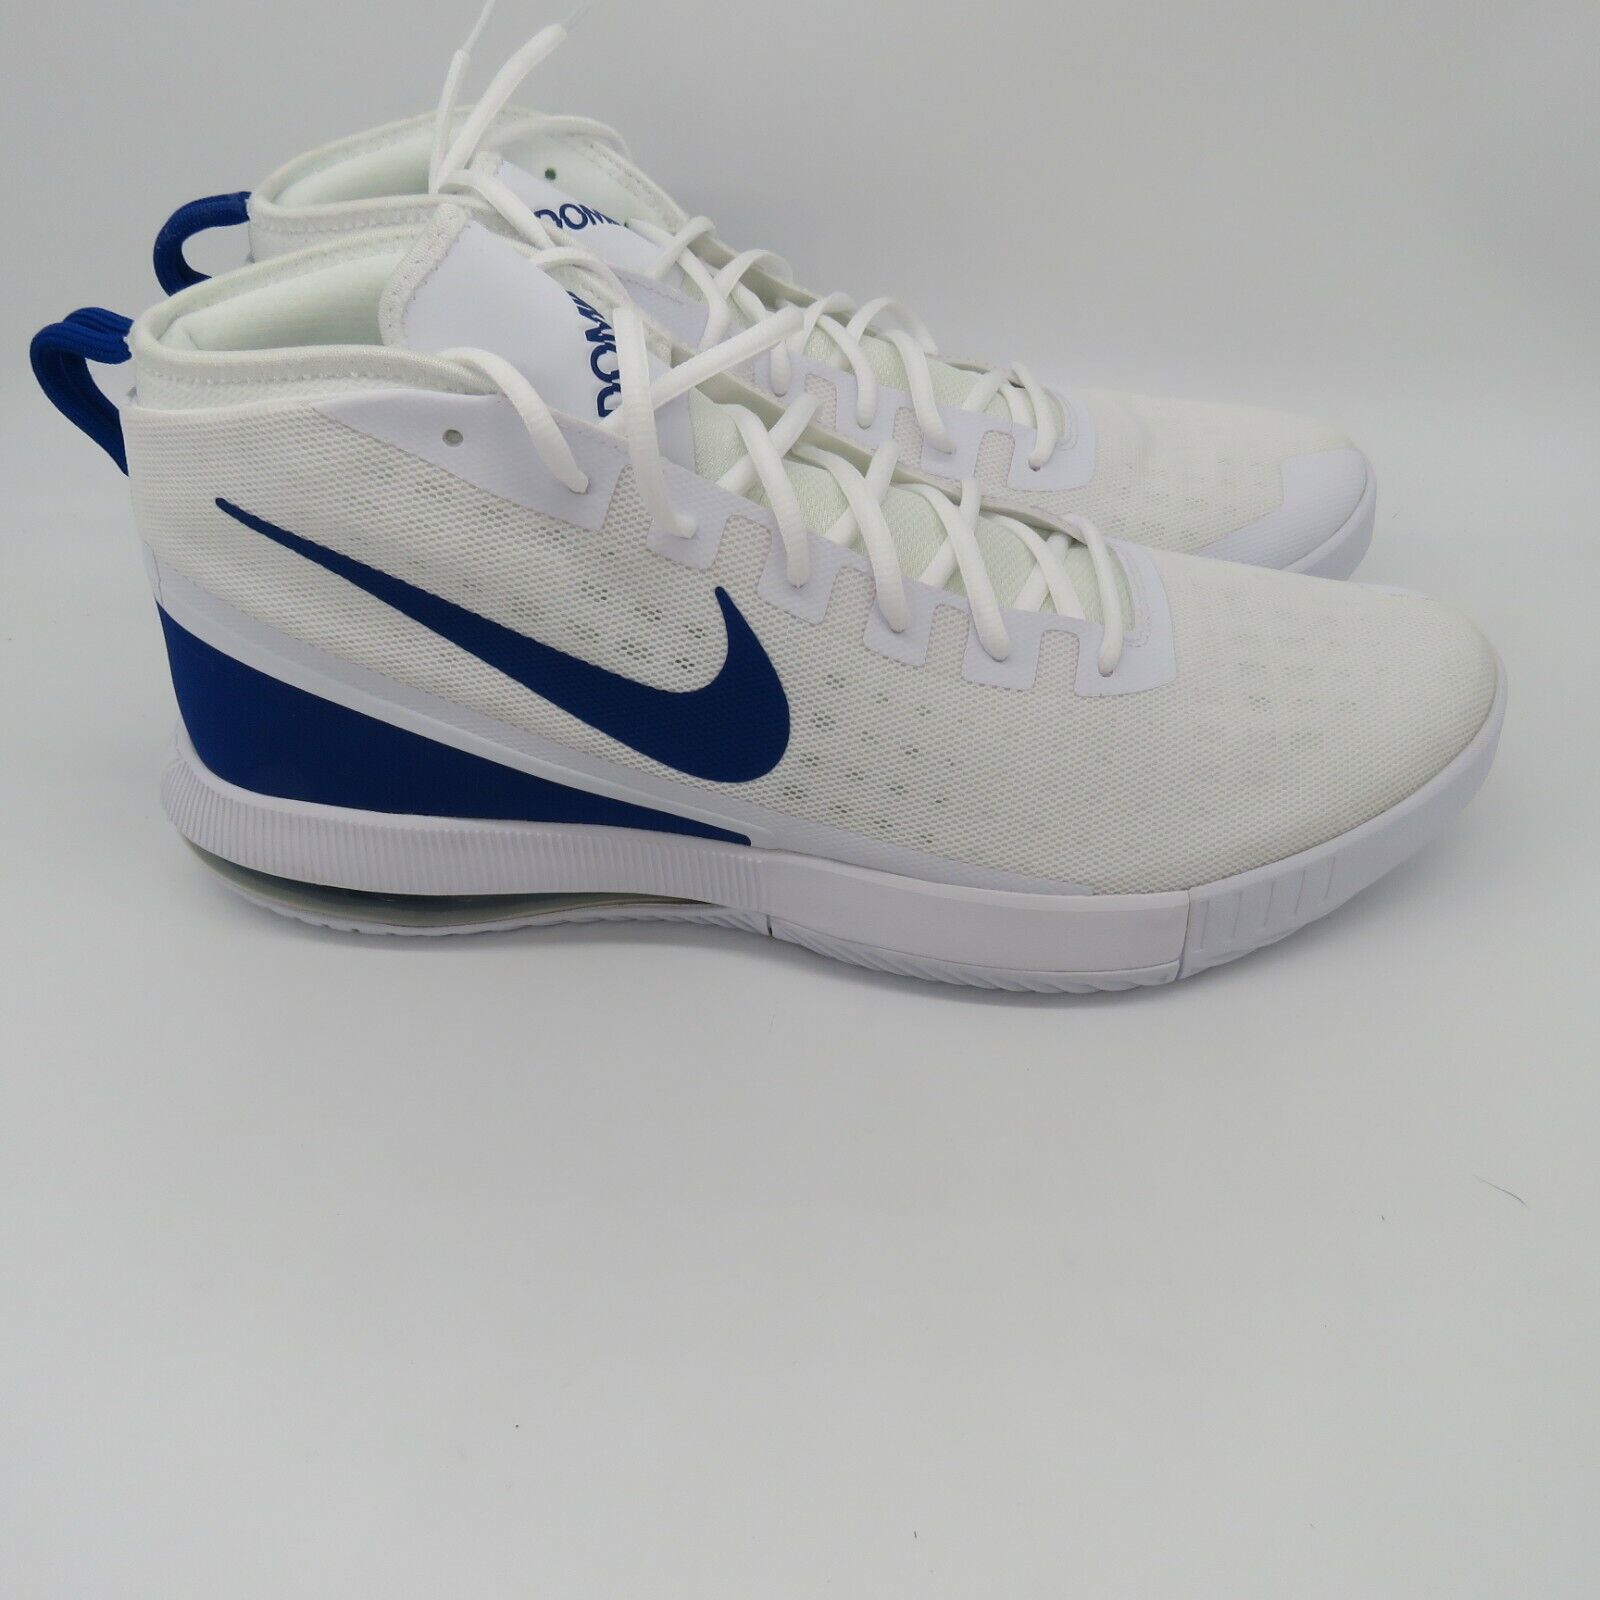 New Air Dominate Basketball Shoes 942520-109 Size 17.5 | eBay